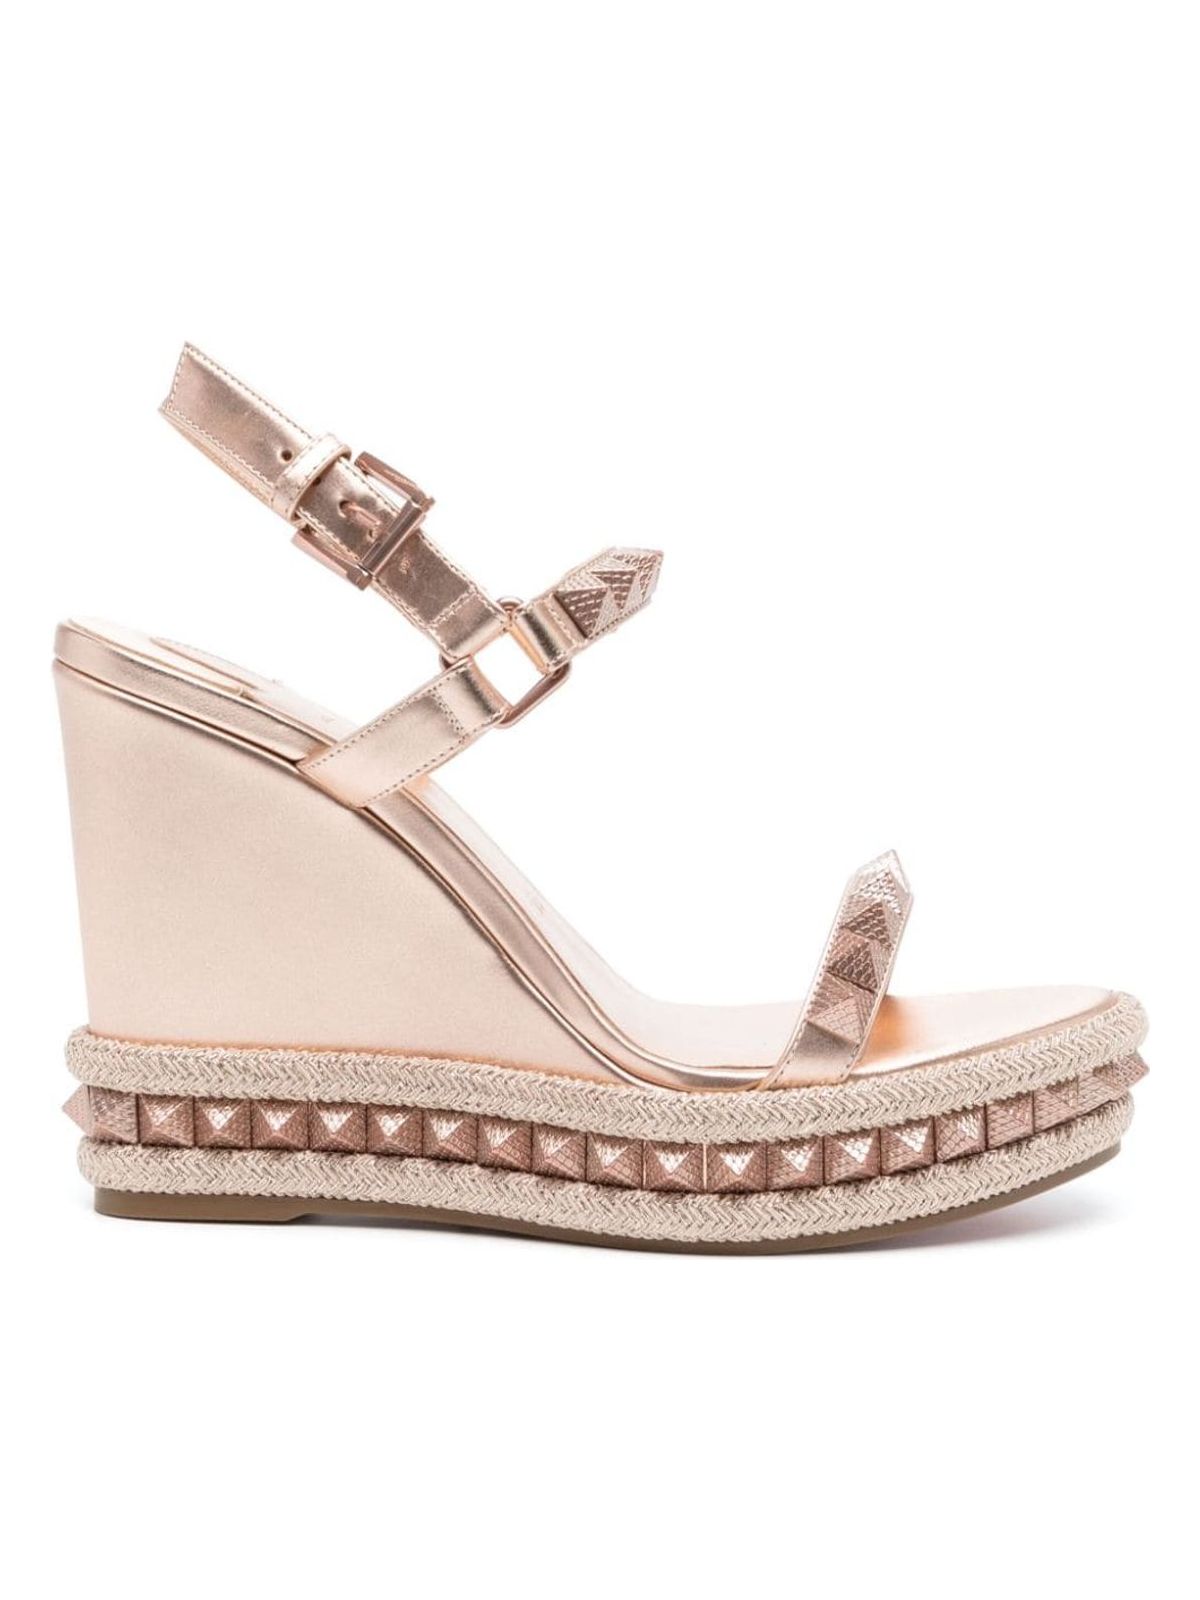 PYRACLOUF608 CHRISTIAN LOUBOUTIN STUD DETAILING BUCKLE-FASTENING ANKLE STRAP WEDGES